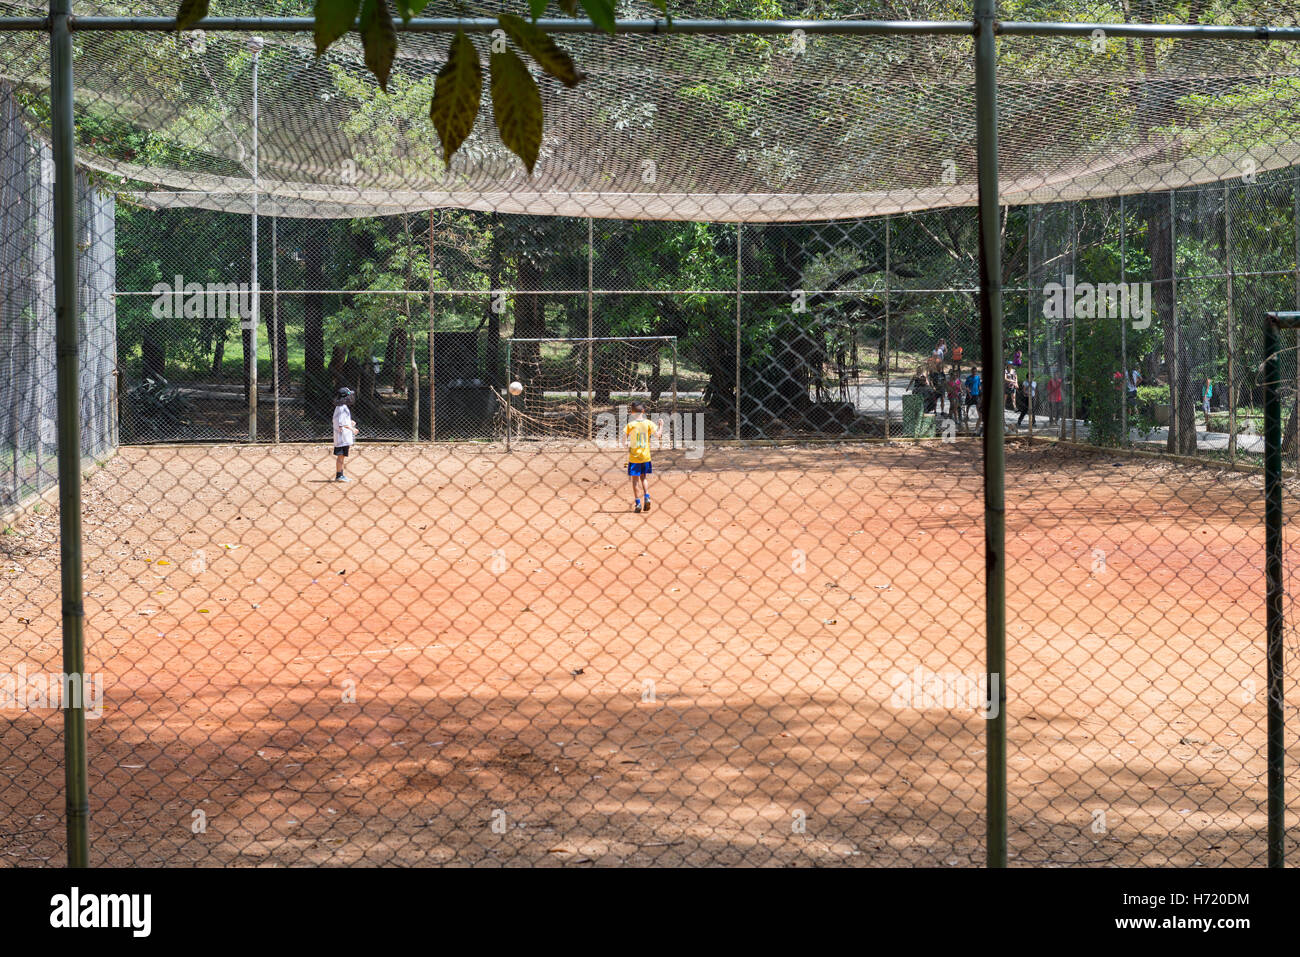 Sao Paulo, Brazil - October 15 2016: Kids playing football at the Aclimacao Park in Sao Paulo, Brazil. Photo series (6 of 8) Stock Photo